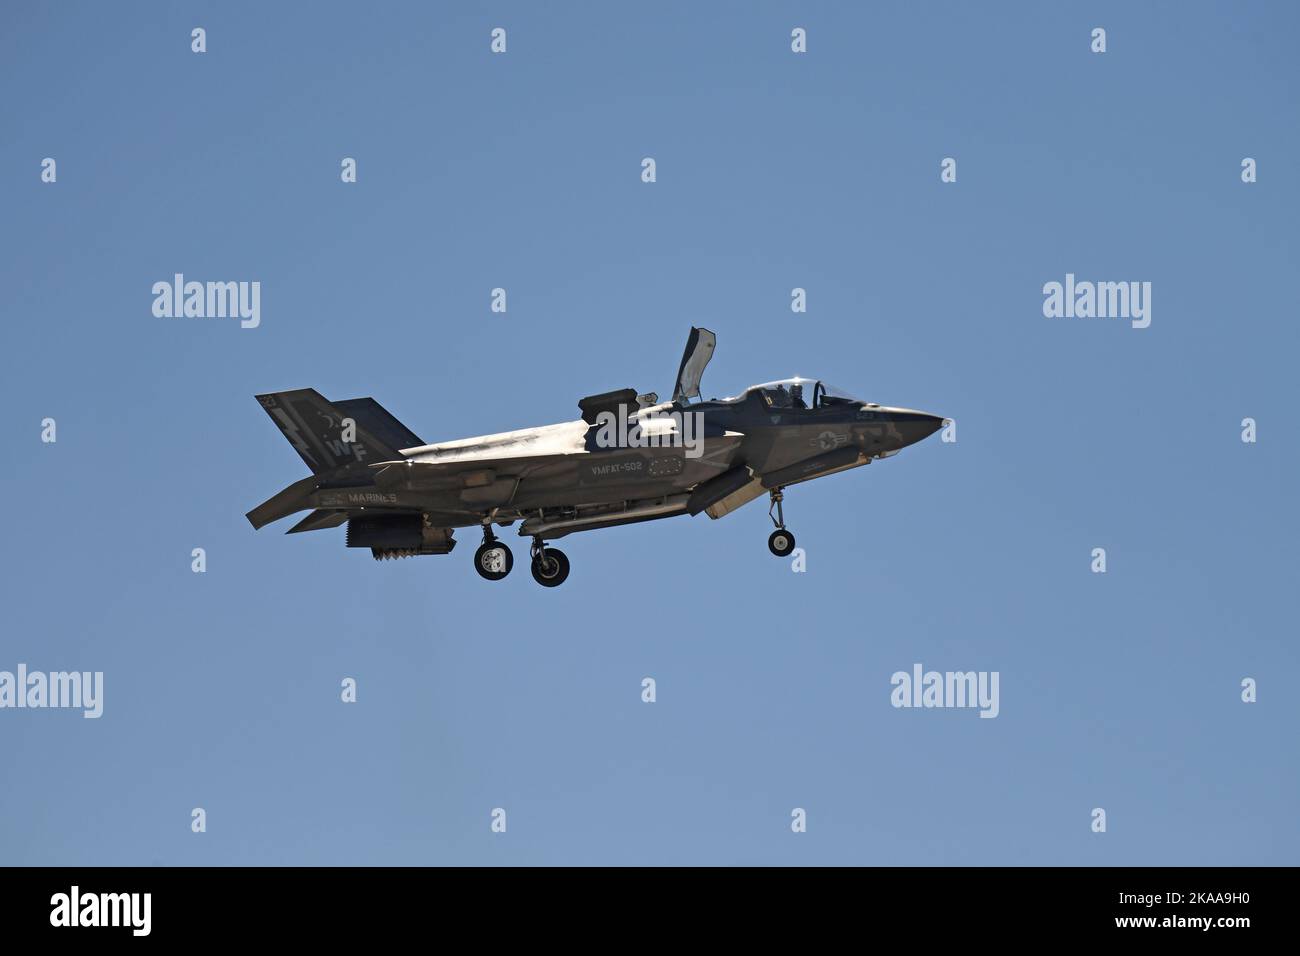 USMC F-35B in hovers at MCAS Miramar in San Diego, California Stock Photo